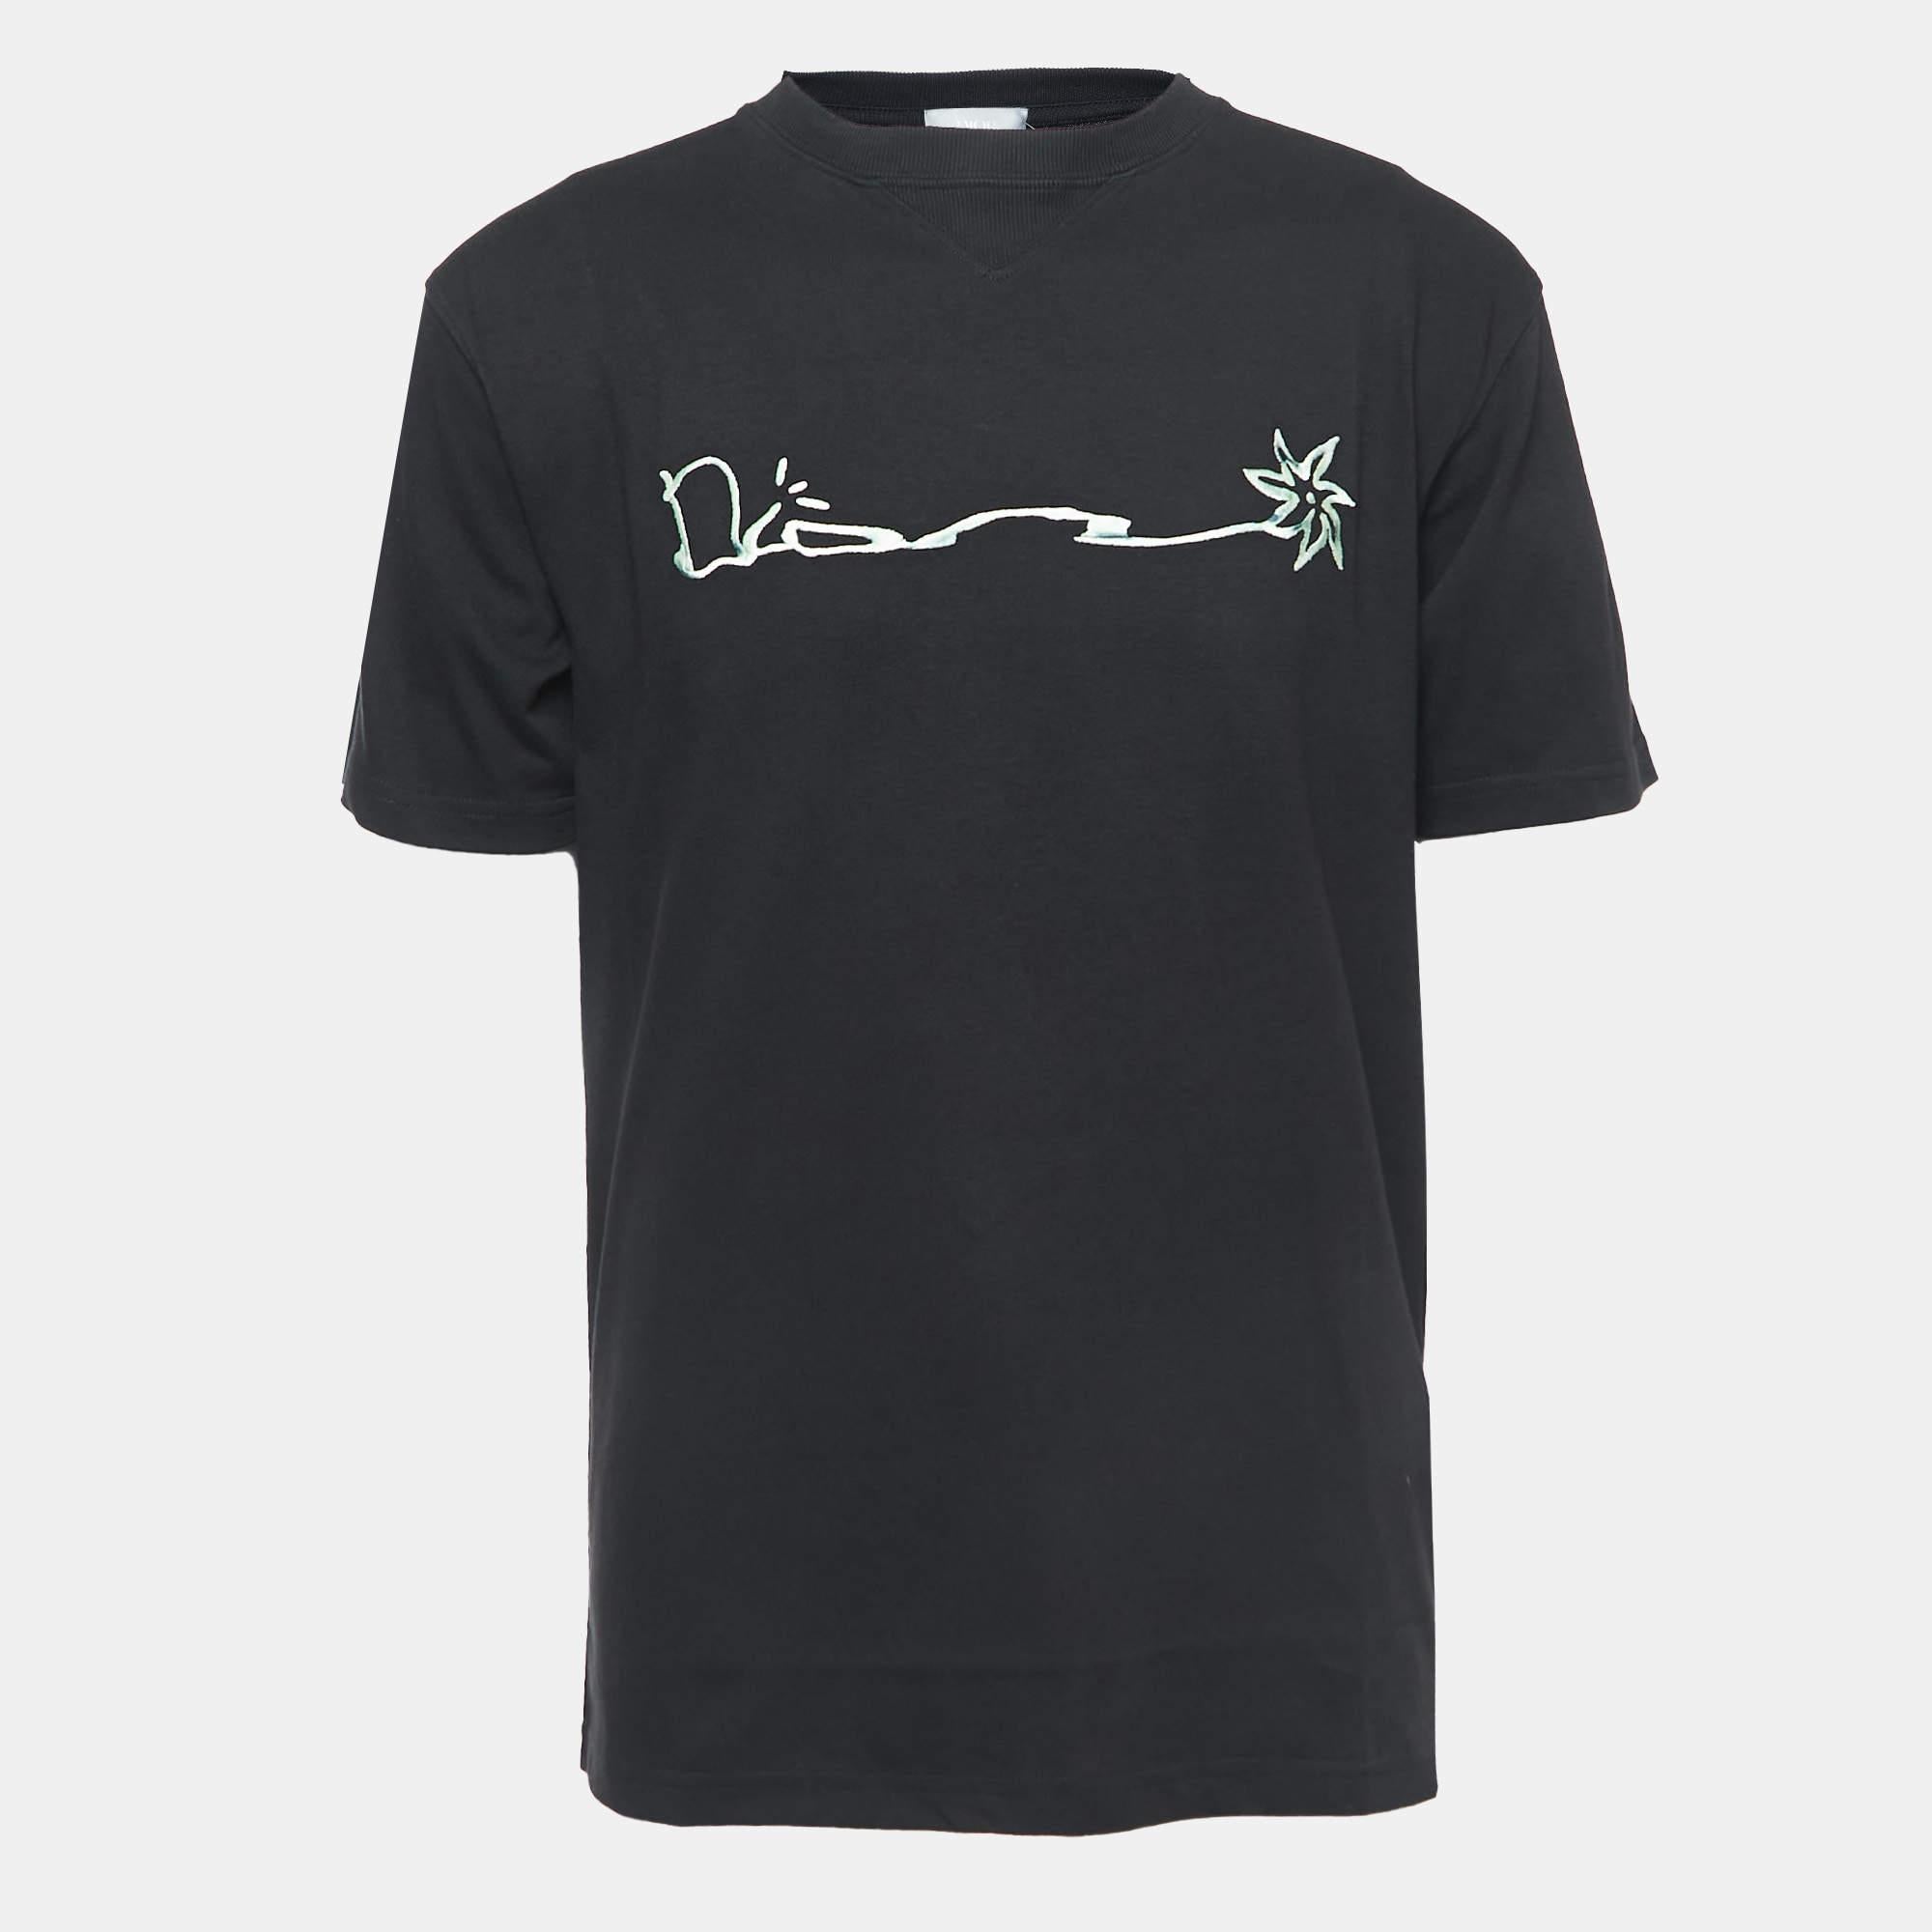 Dior X Cactus Jack Black Embroidered Crew Neck T-Shirt S For Sale 1